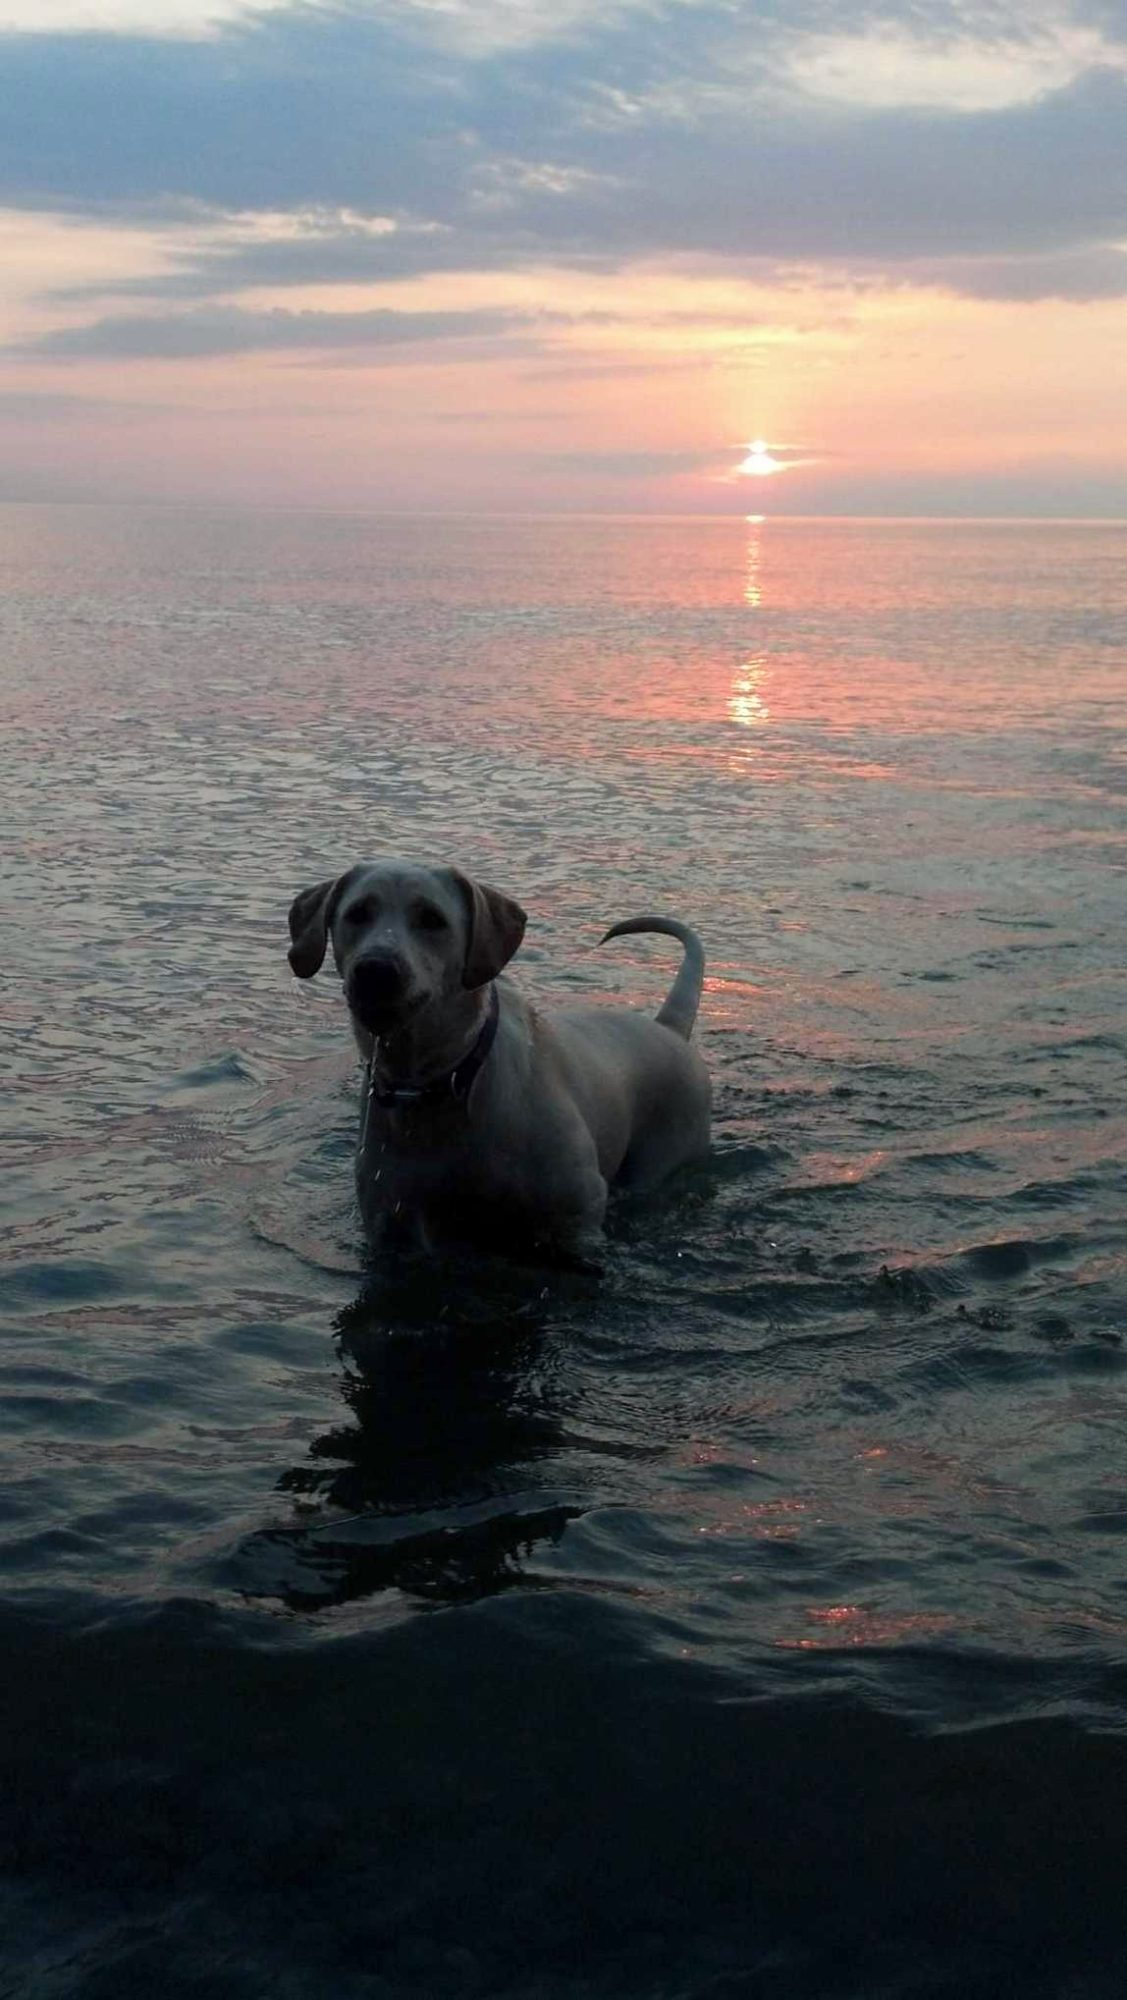 Dog coming up out of Lake Ontario with colorful sunset